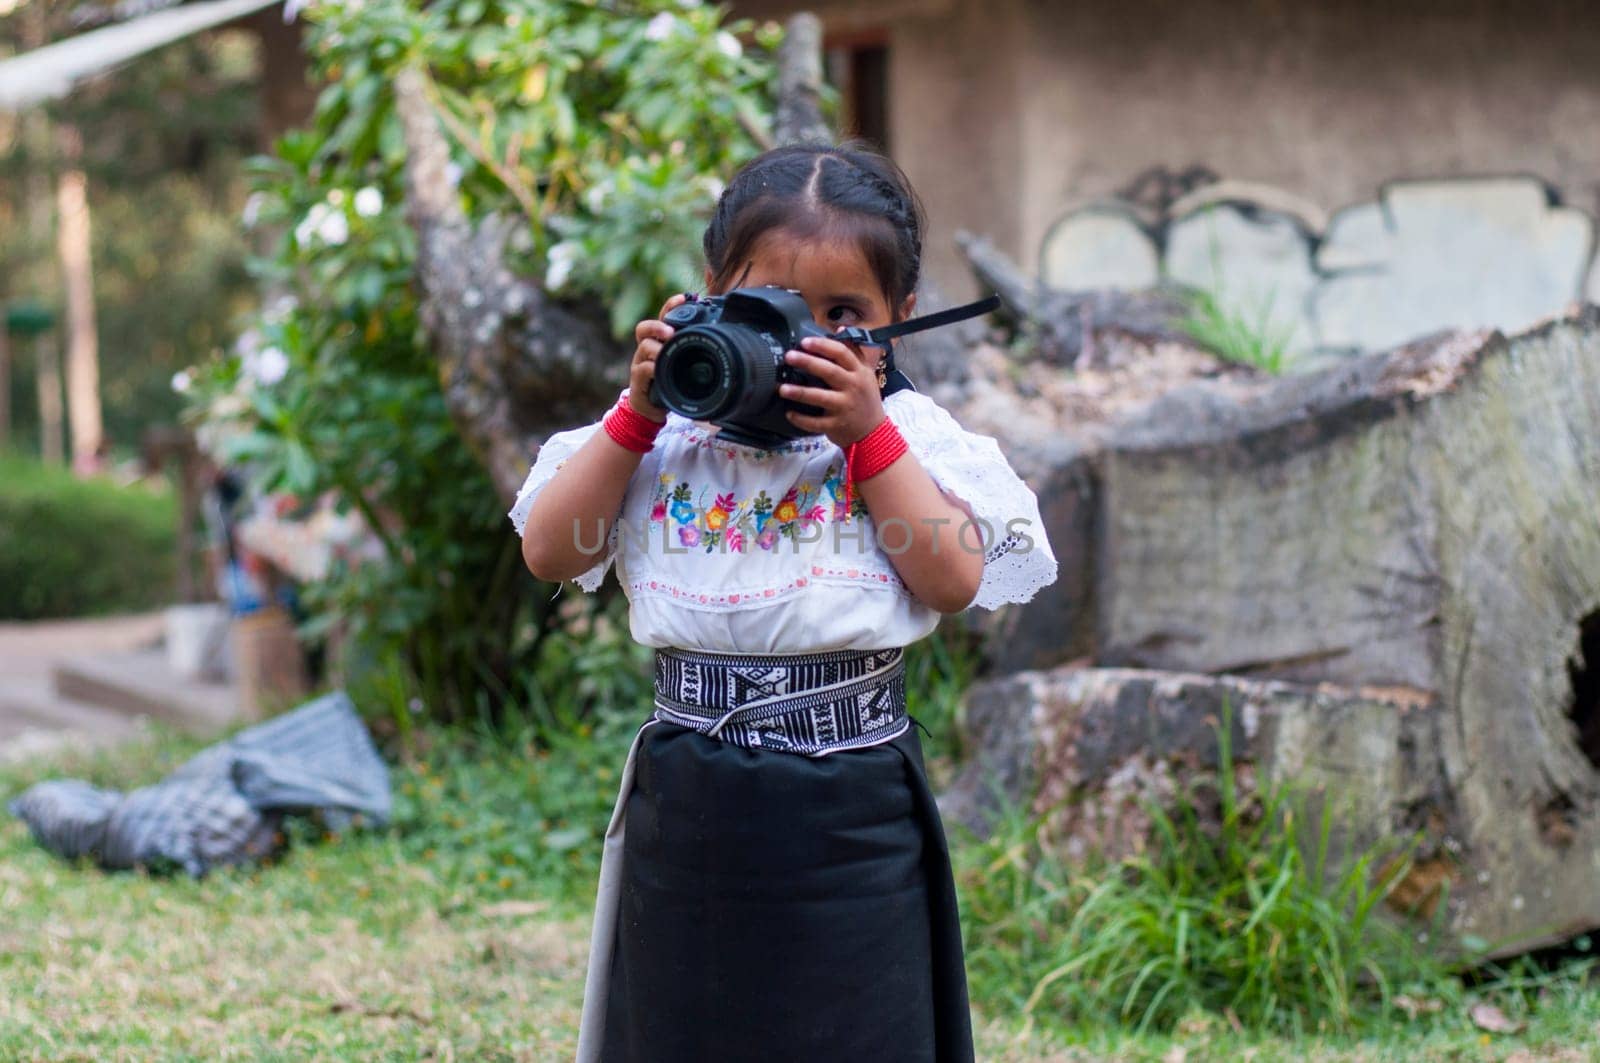 Cultural Discovery through a Child's Lens: Exploring Indigenous Attire and Reflex Camera in the Heart of the Amazon Rainforest by Raulmartin